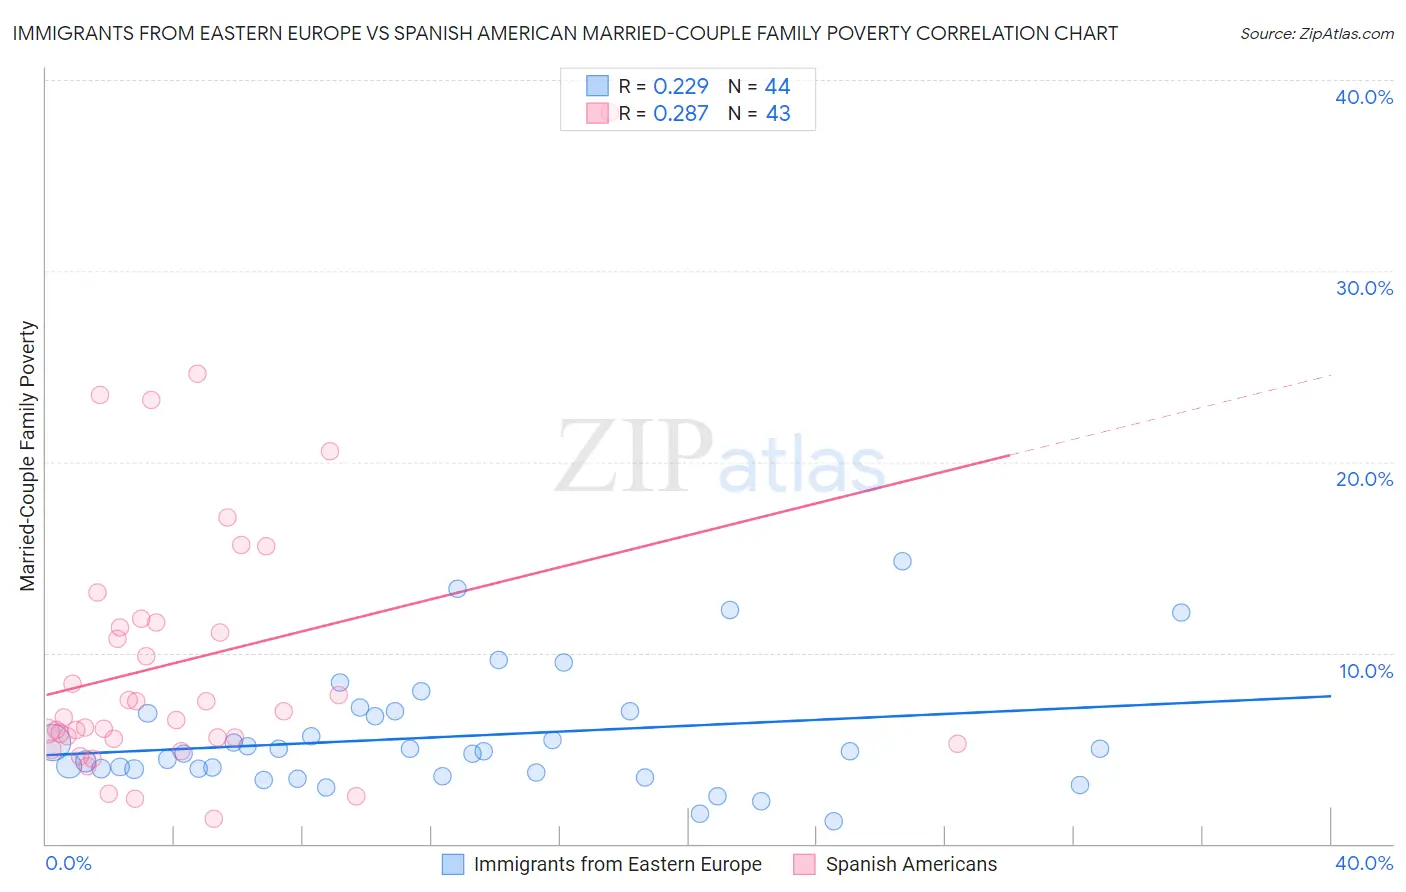 Immigrants from Eastern Europe vs Spanish American Married-Couple Family Poverty